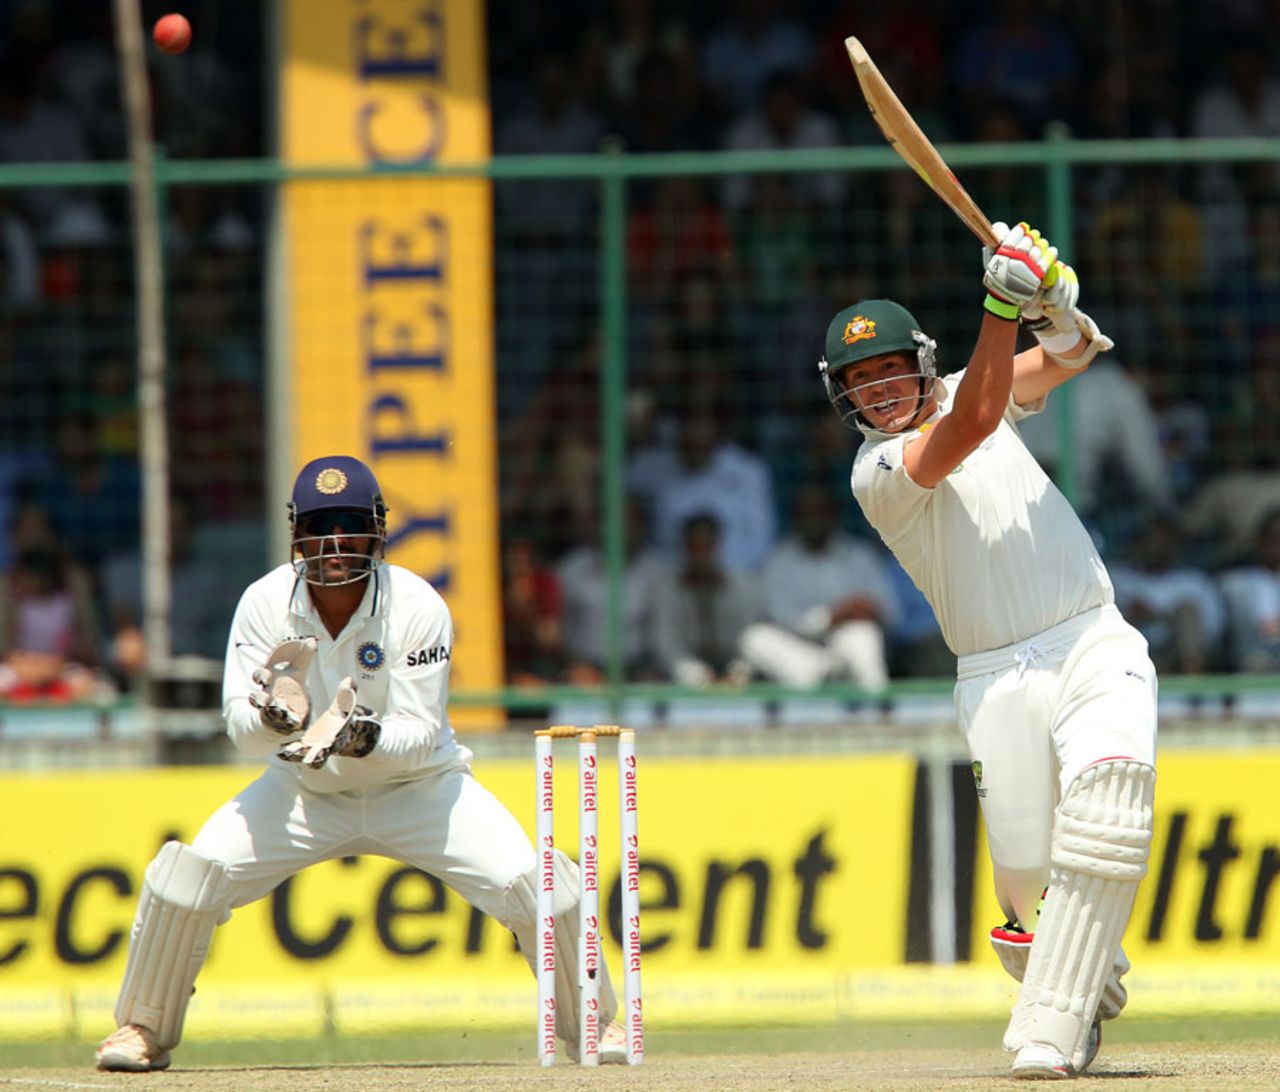 Peter Siddle hits down the ground, India v Australia, 4th Test, Delhi, 3rd day, March 24, 2013